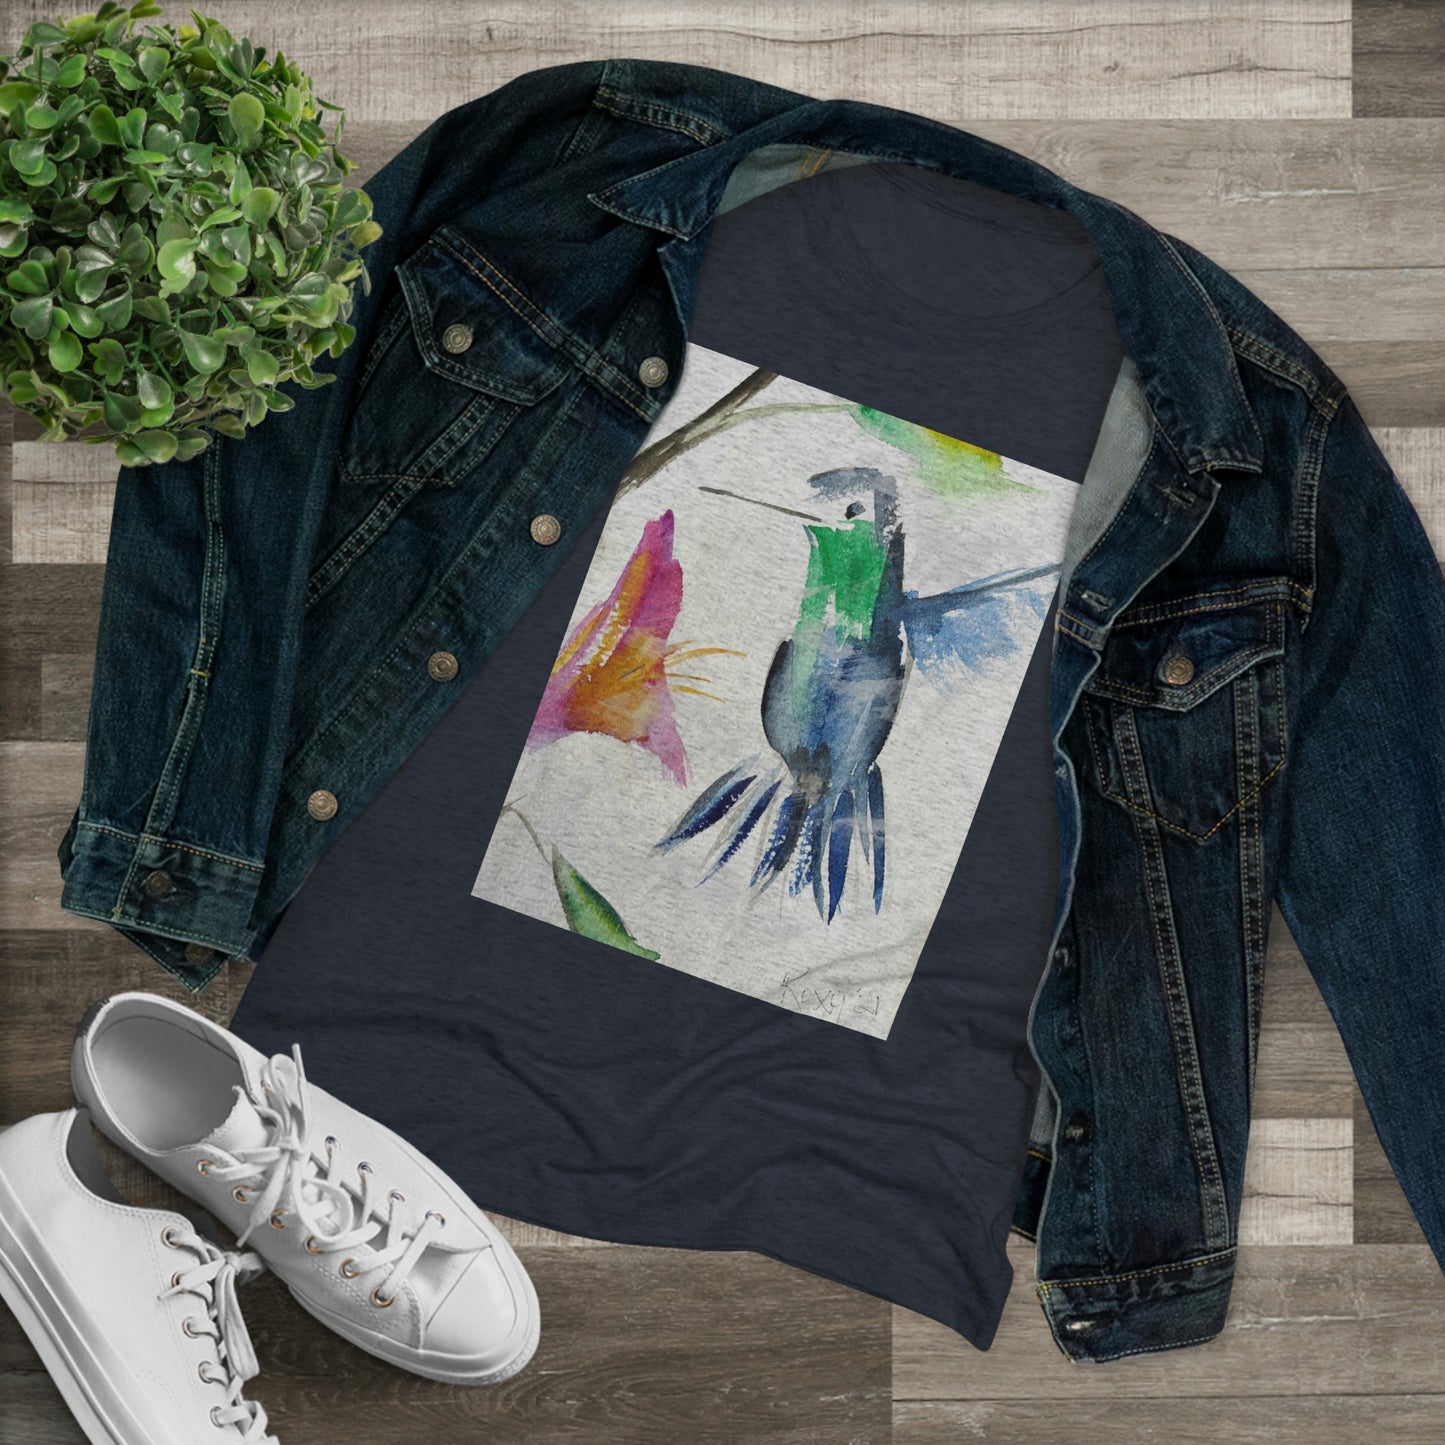 Floaty Hummingbird (image on front) Women's fitted Triblend Tee  tee shirt